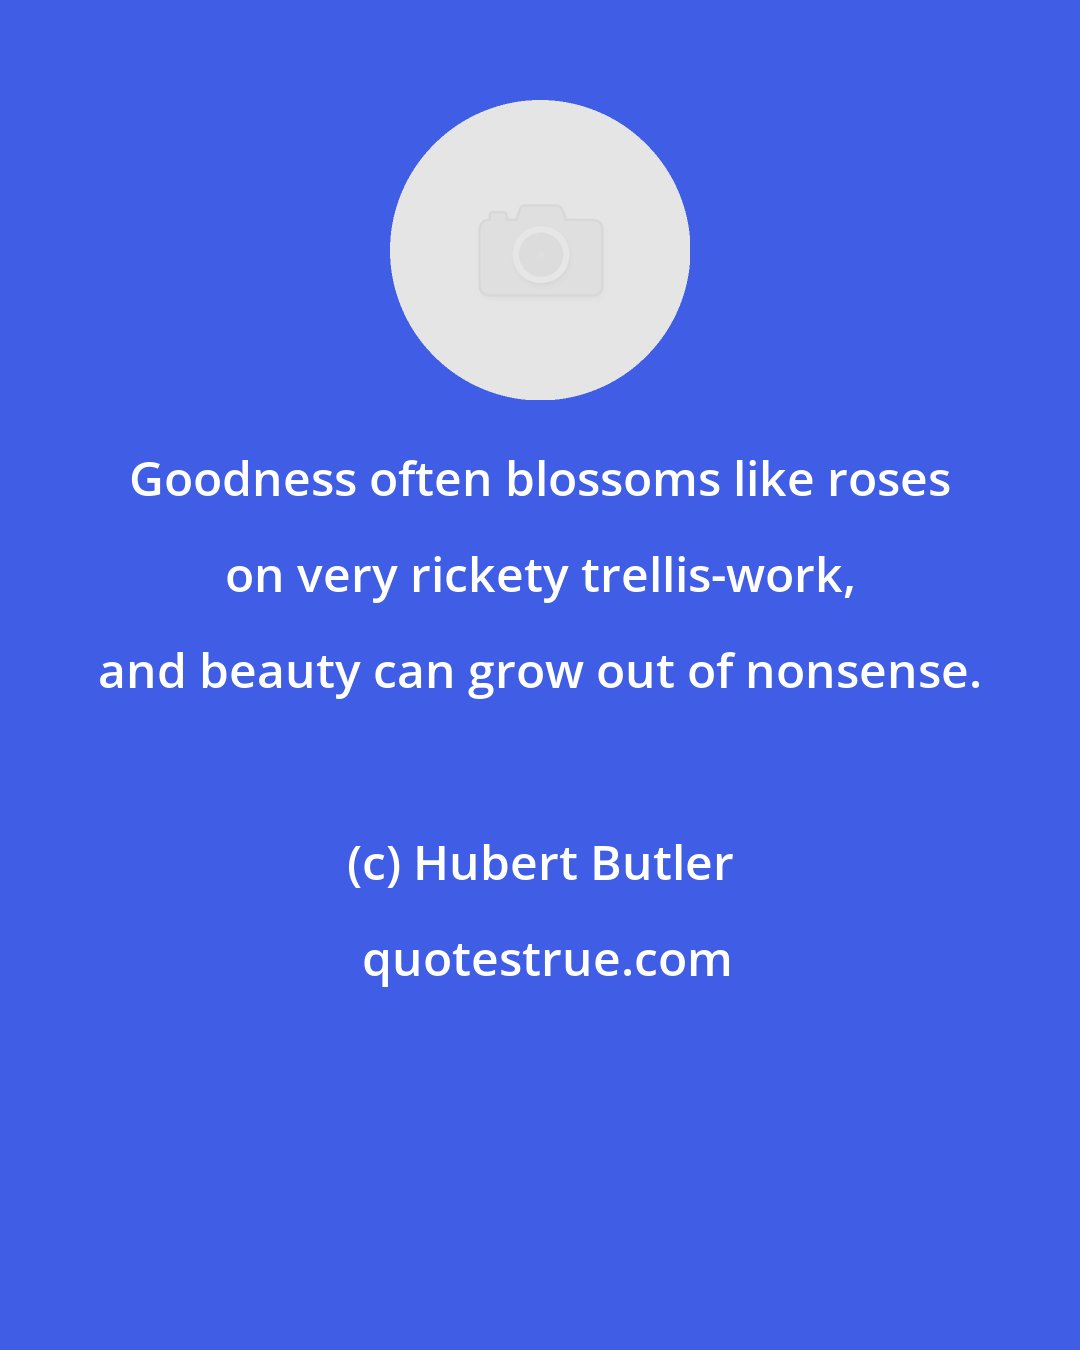 Hubert Butler: Goodness often blossoms like roses on very rickety trellis-work, and beauty can grow out of nonsense.